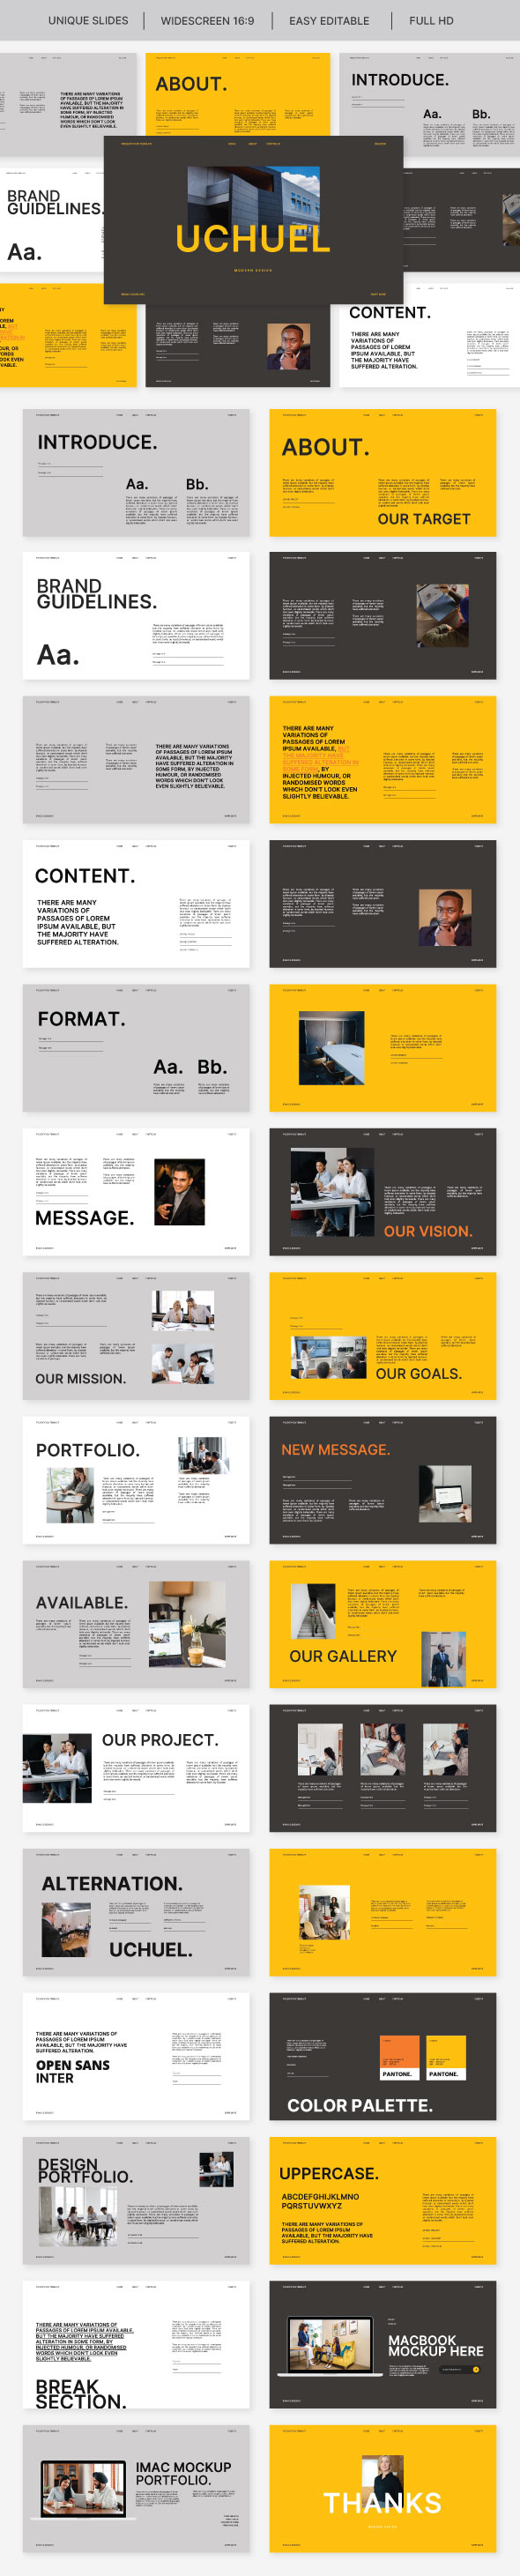 Uchuel Brand Guidelines Powerpoint Template